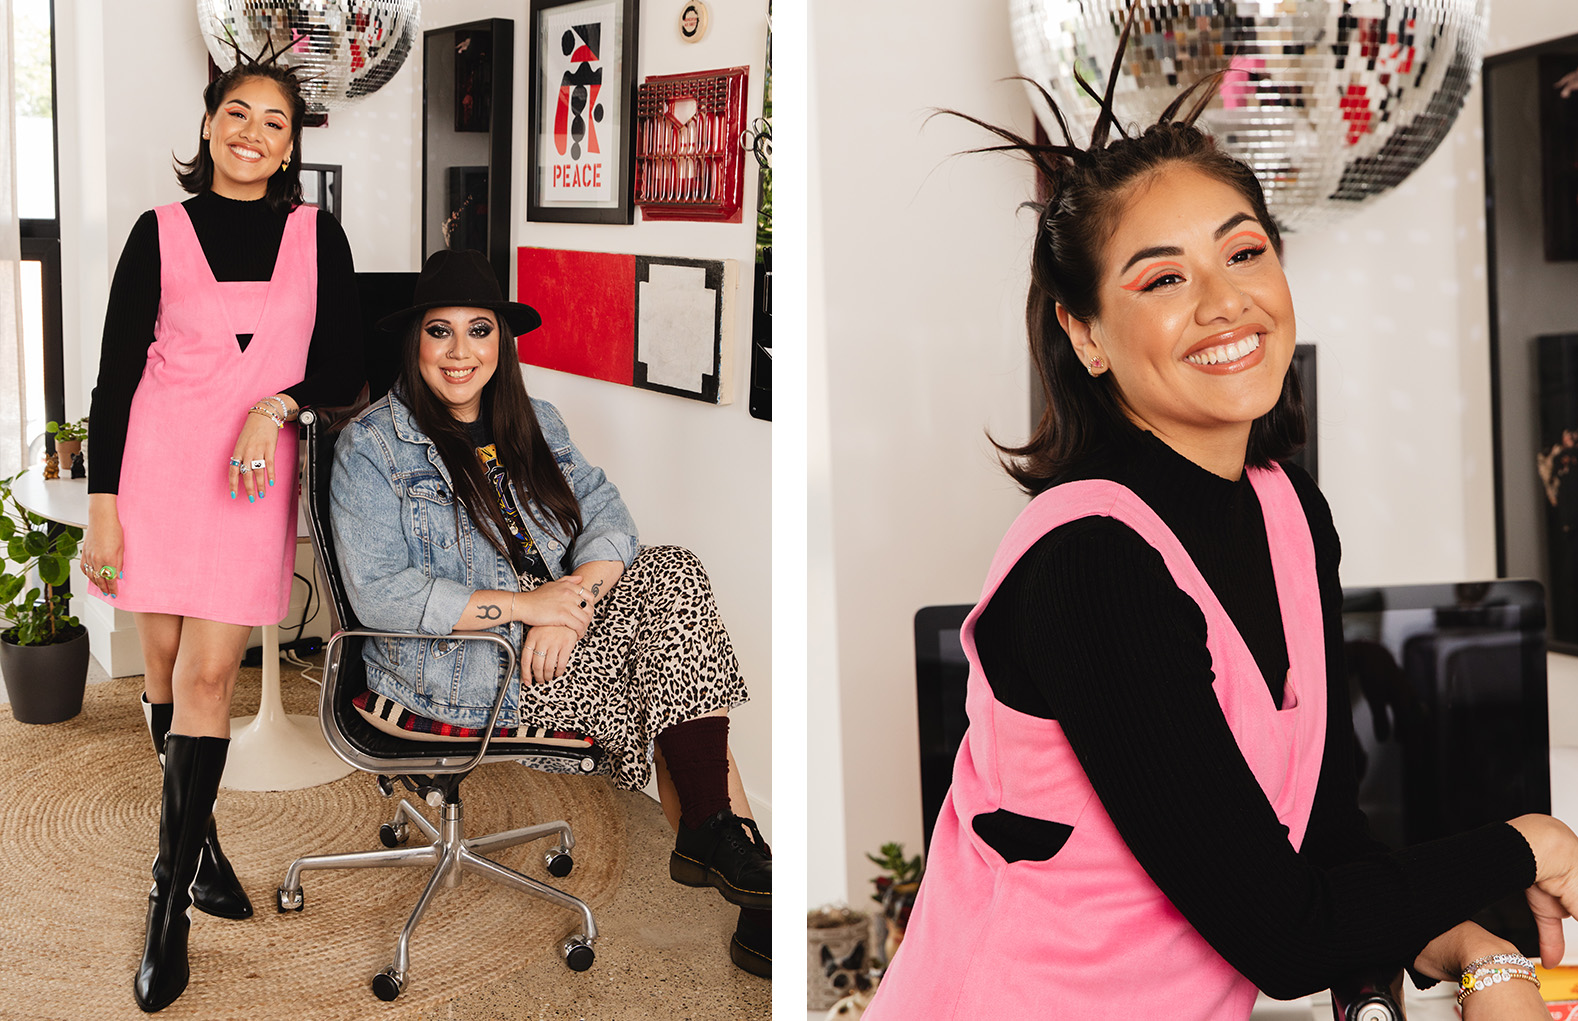 On the left, lizz and Mary wearing winter fashion. On the right, lizz is smiling leaning on a chair.